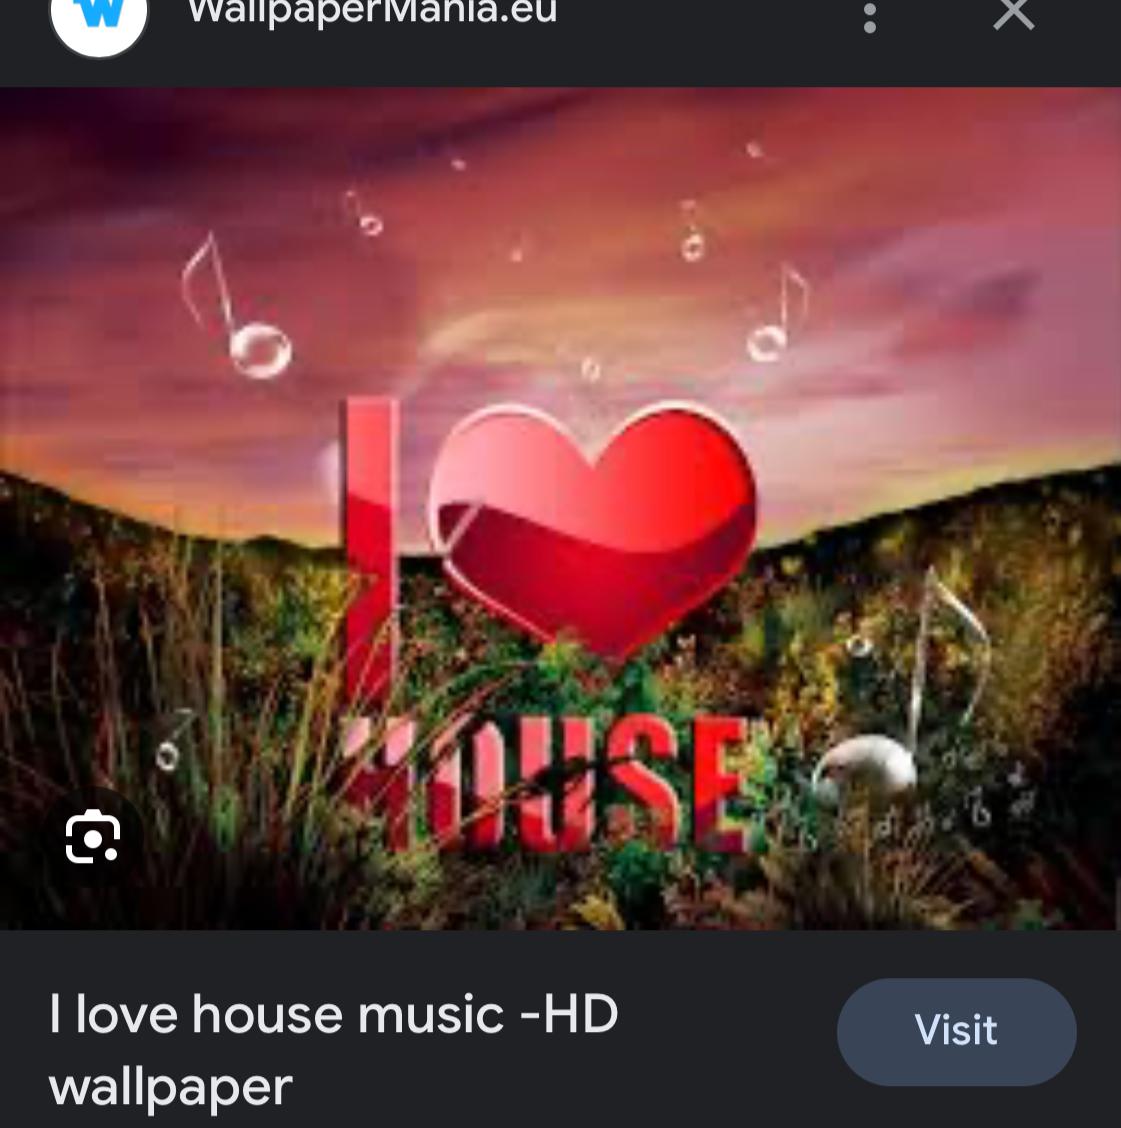 FOR THE LOVE OF HOUSE